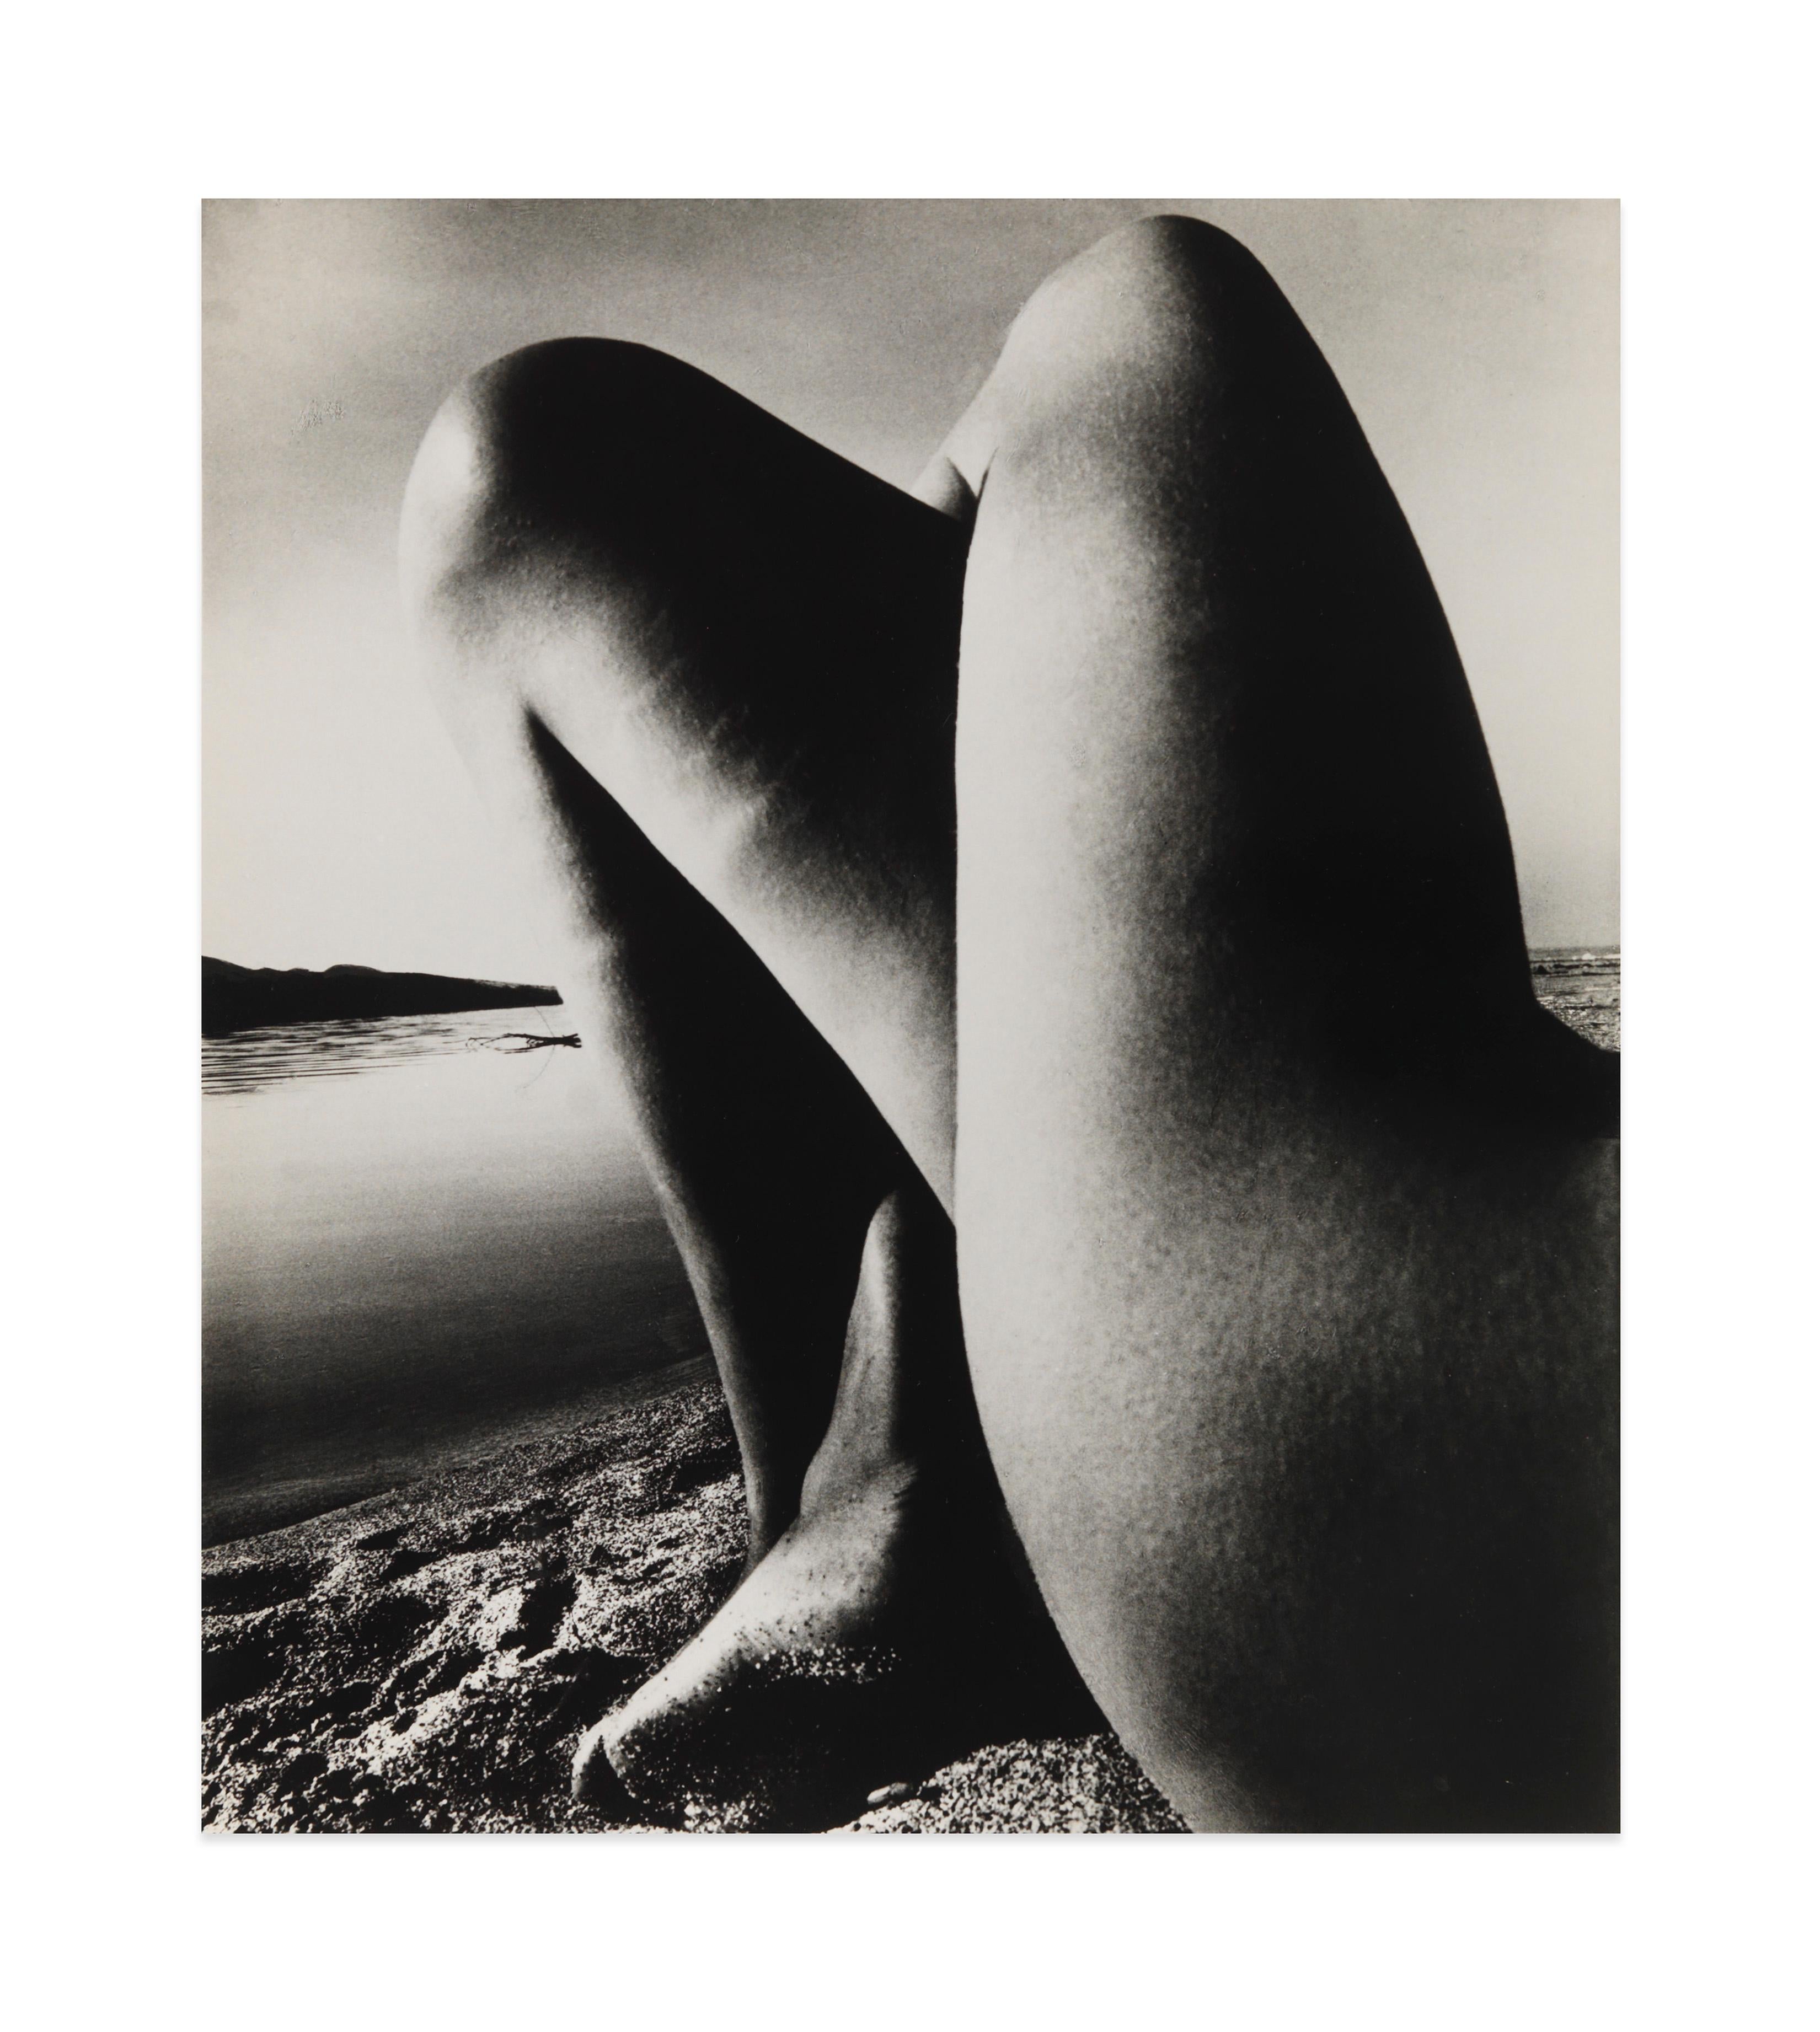 Nude, St. Cyprien, France, October - Photograph by Bill Brandt